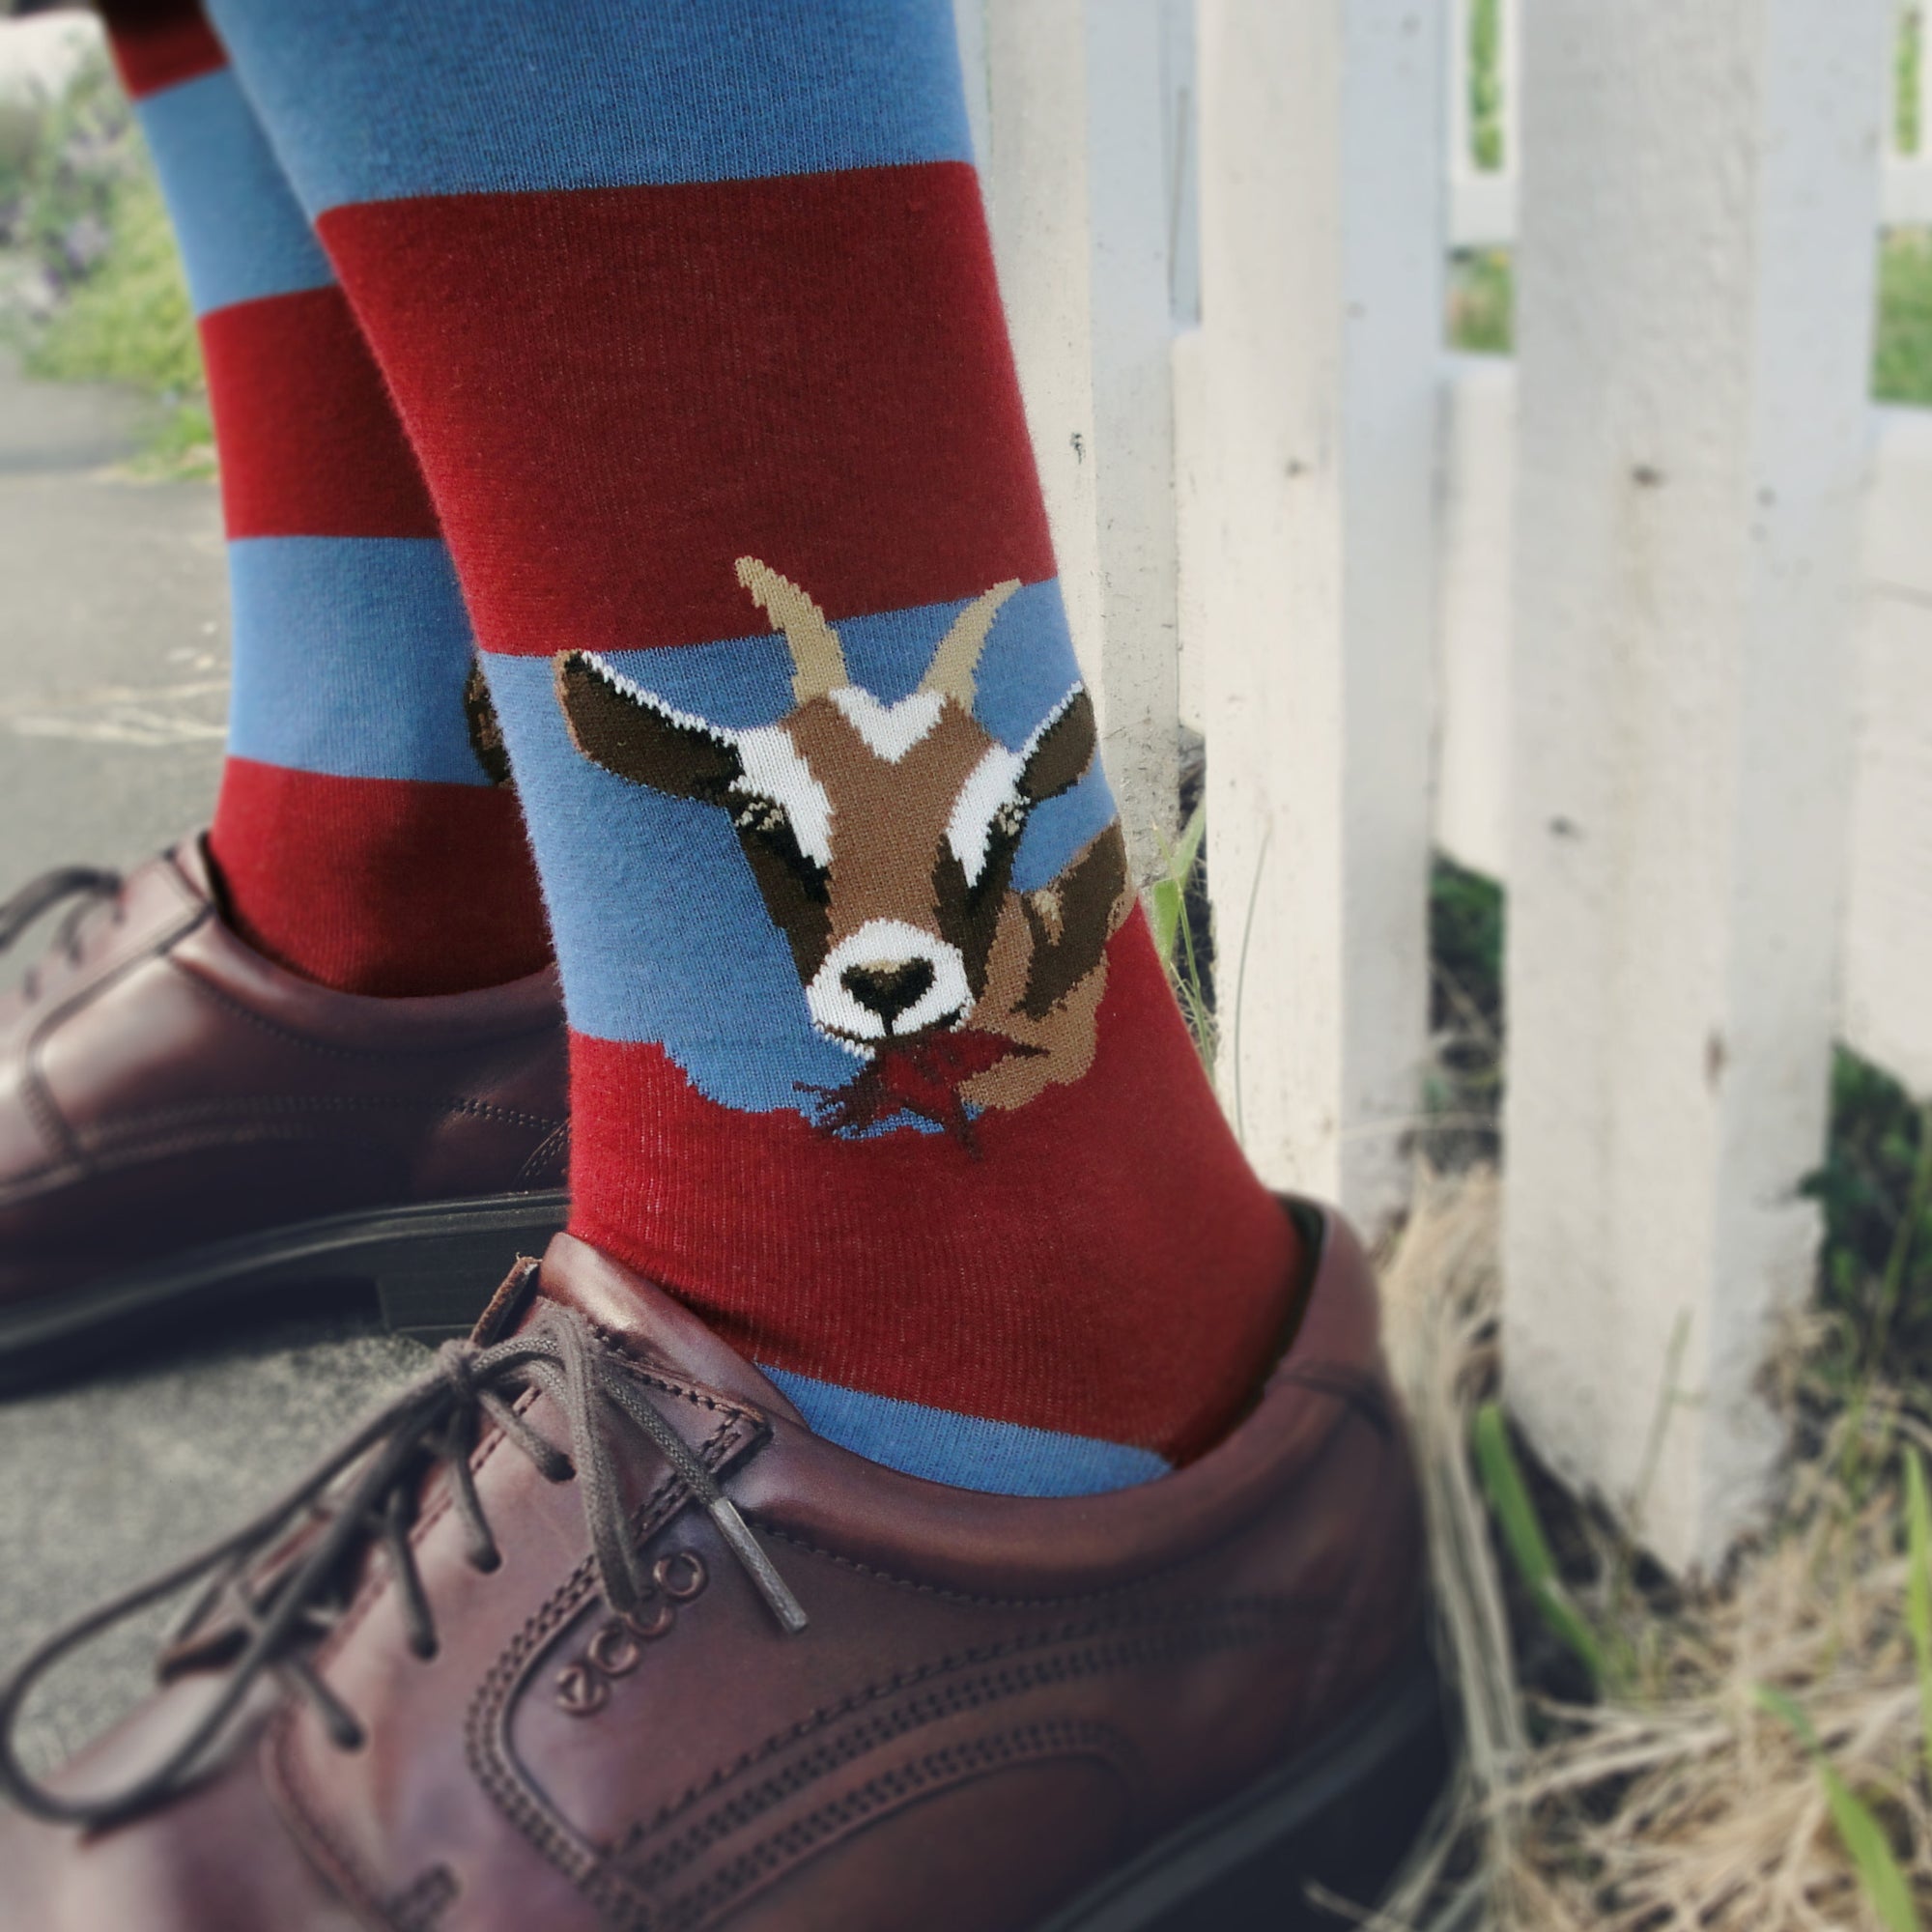 Goat socks for men with goats eating the striped on these red and blue striped socks